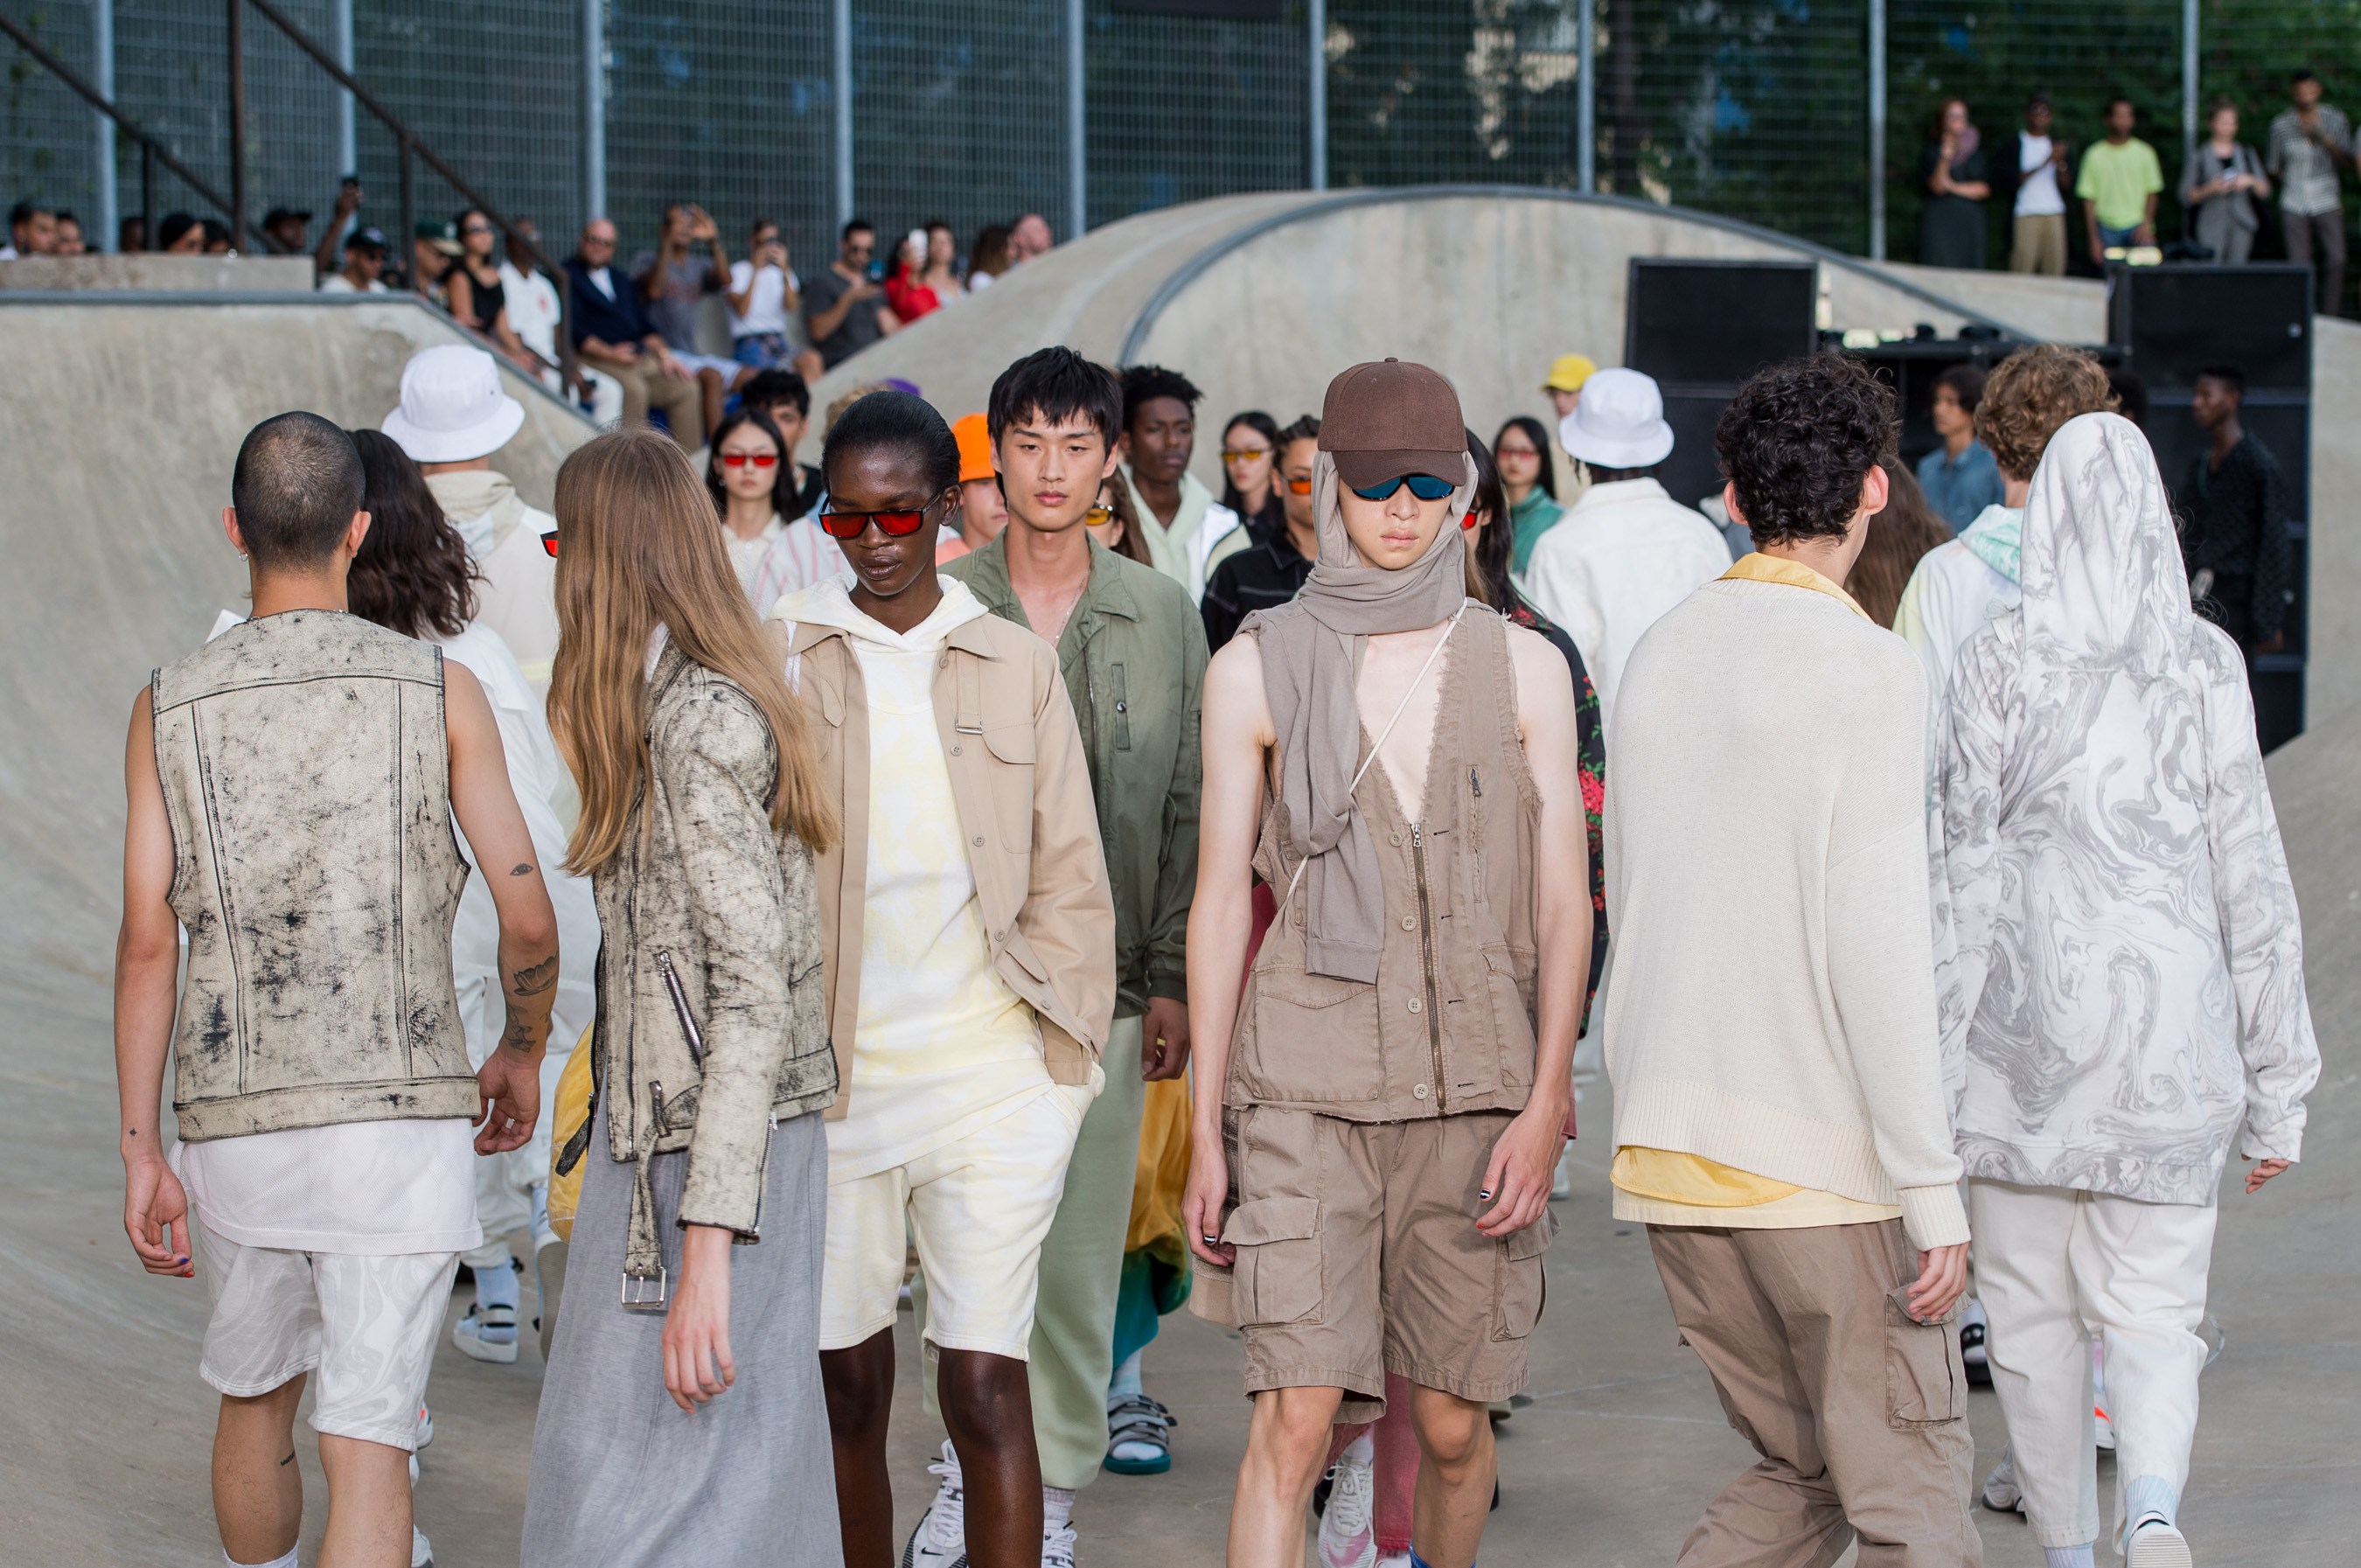 Top 5 Other New York Spring 2019 Collections and Fashion Shows